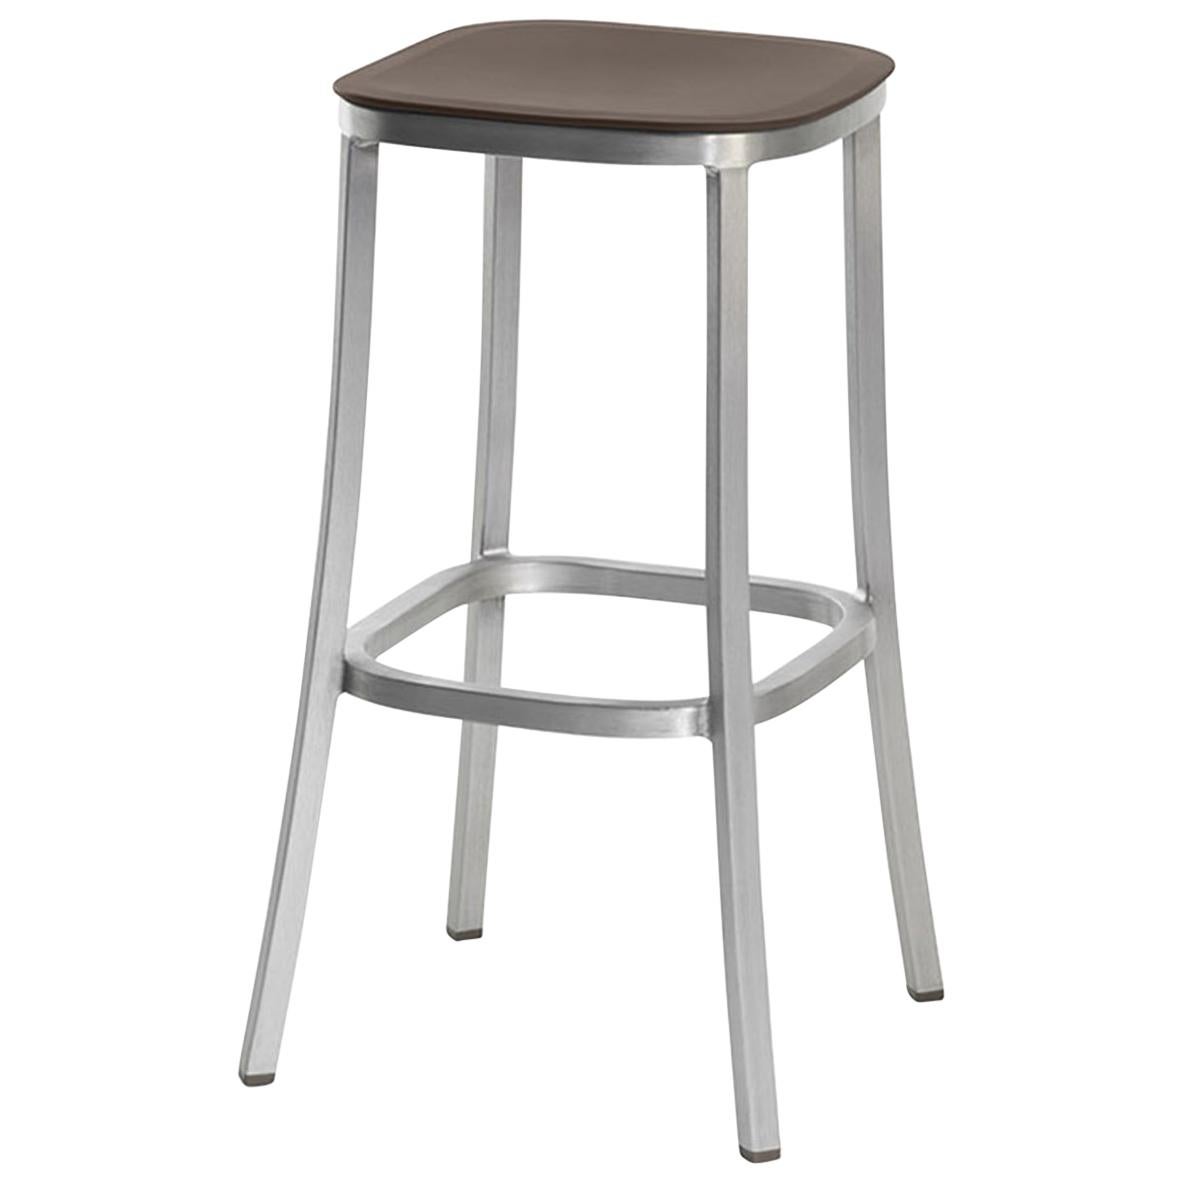 Emeco 1 Inch Barstool in Brushed Aluminum and Brown by Jasper Morrison